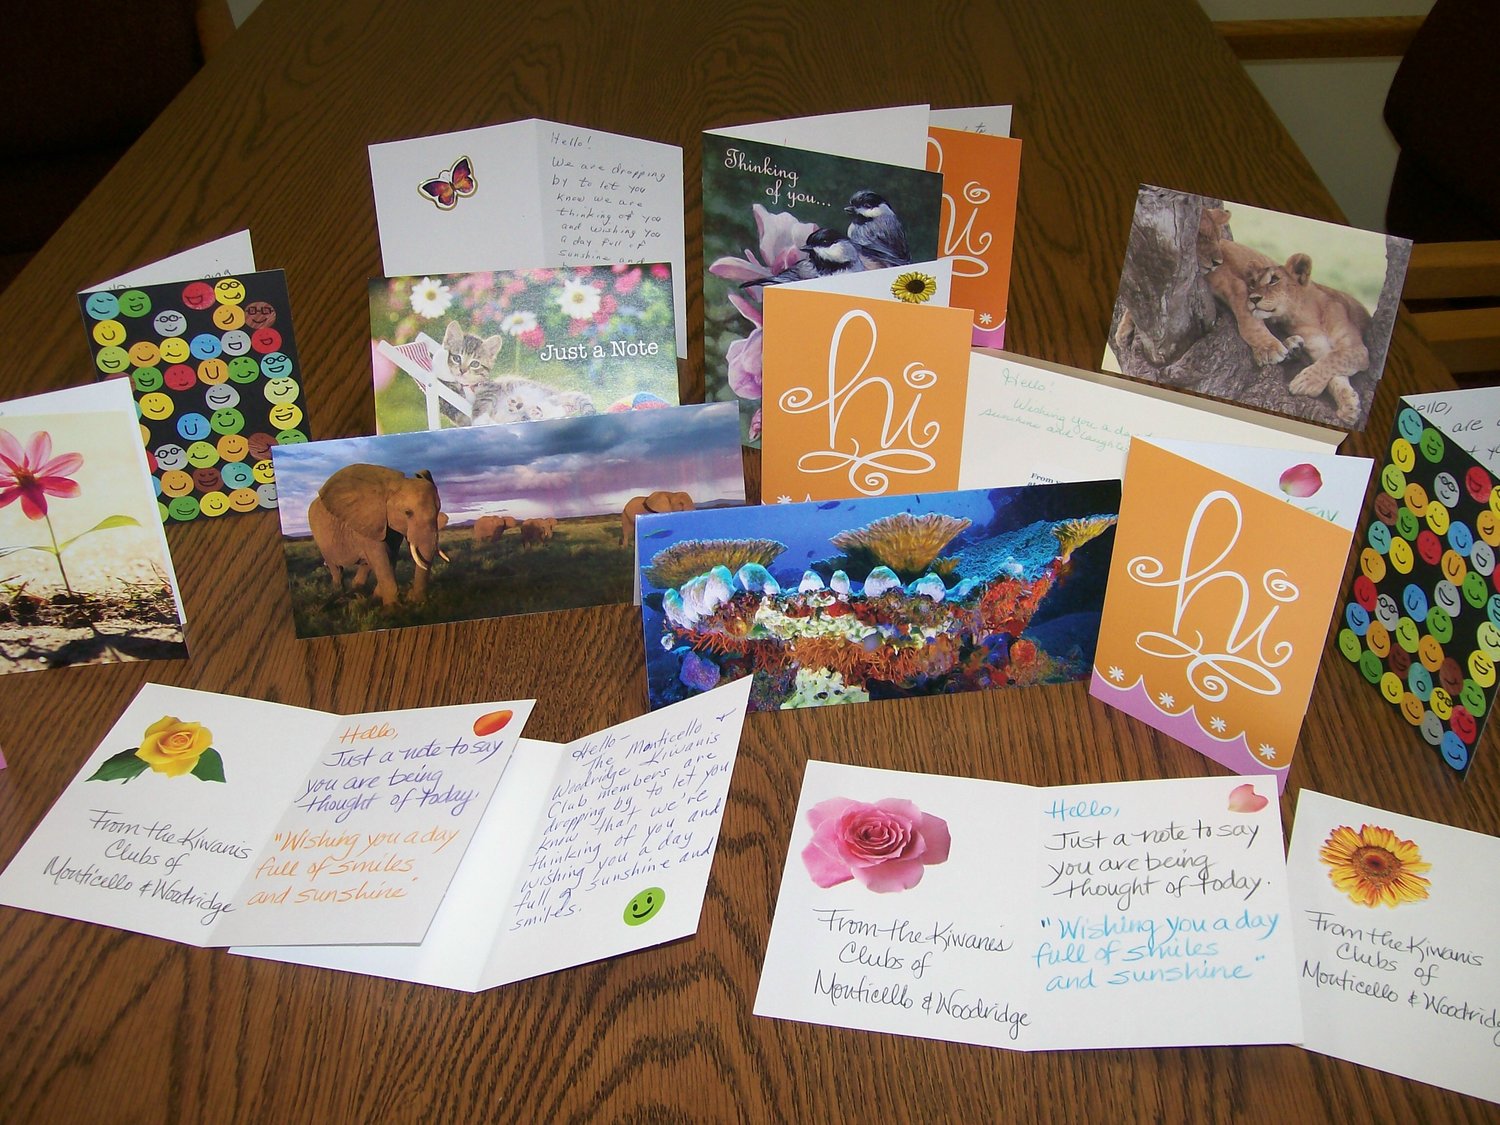 Cards given by Kiwanis clubs to individuals served by NAMI and ATI...